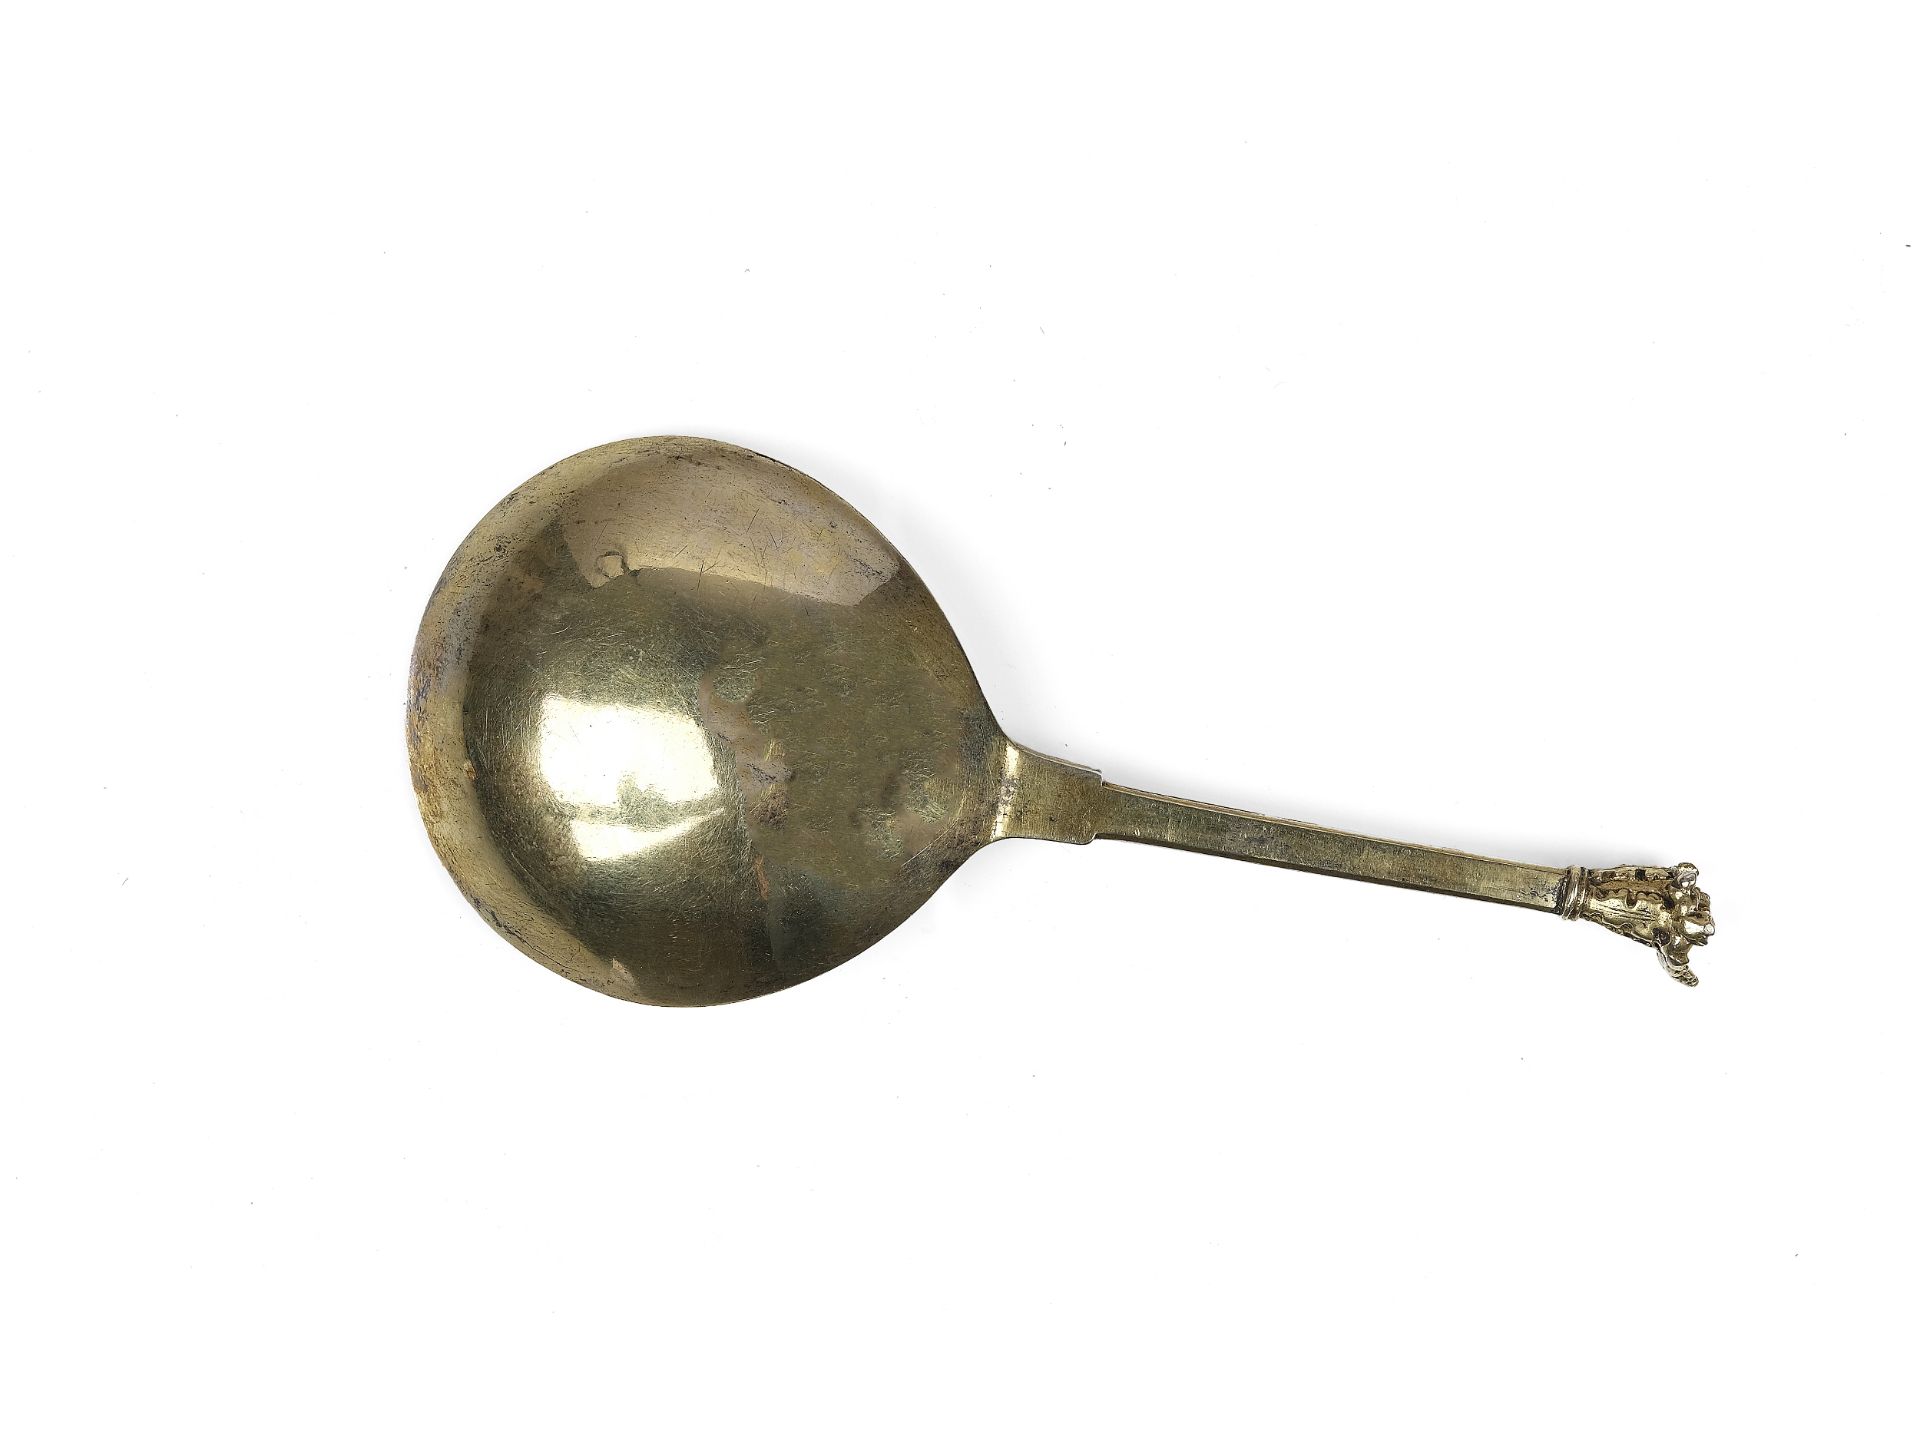 Gothic spoon, late 15th/early 16th century - Image 2 of 2